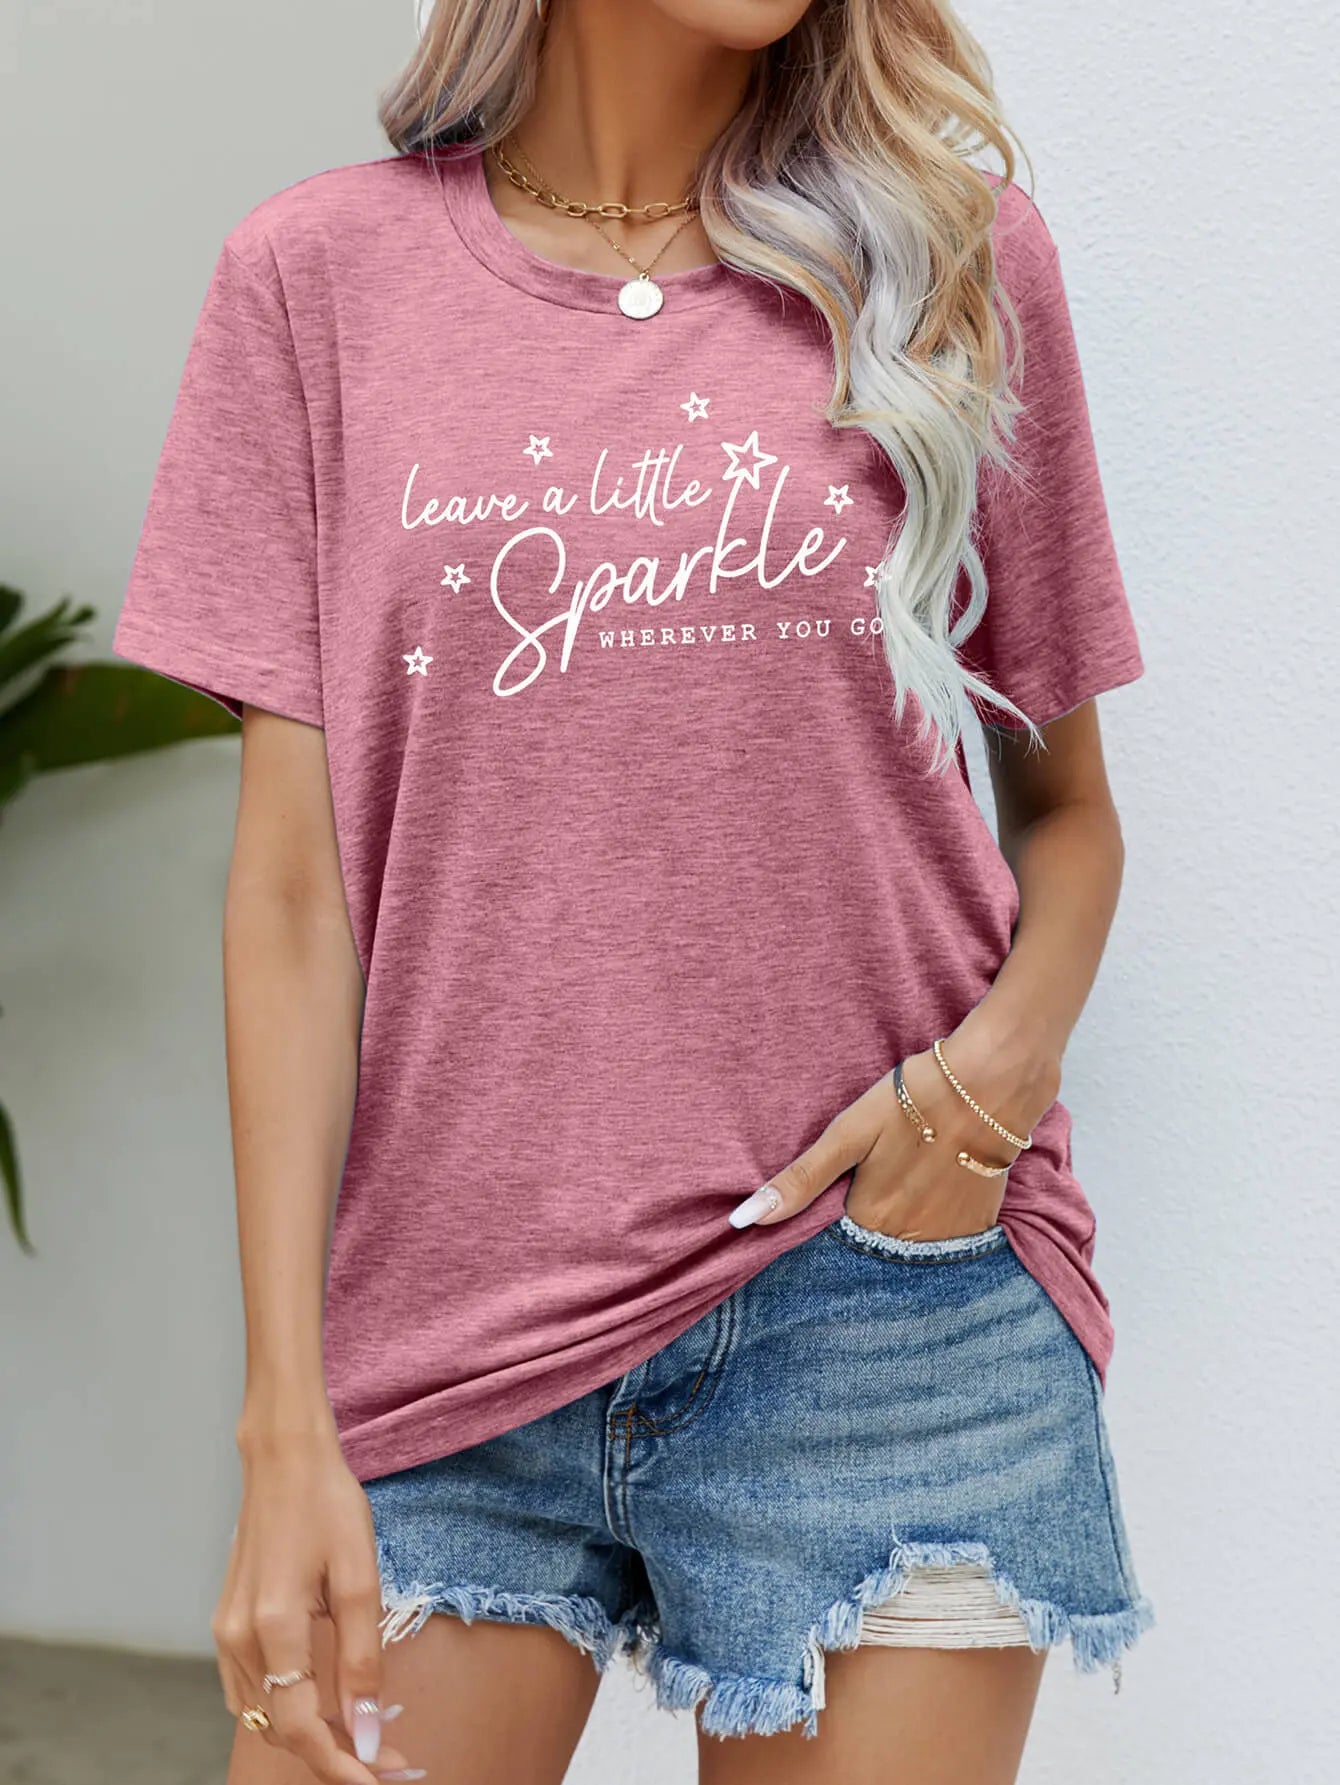 LEAVE A LITTLE SPARKLE WHEREVER YOU GO Tee Shirt - Crystal Vibrations & Healing